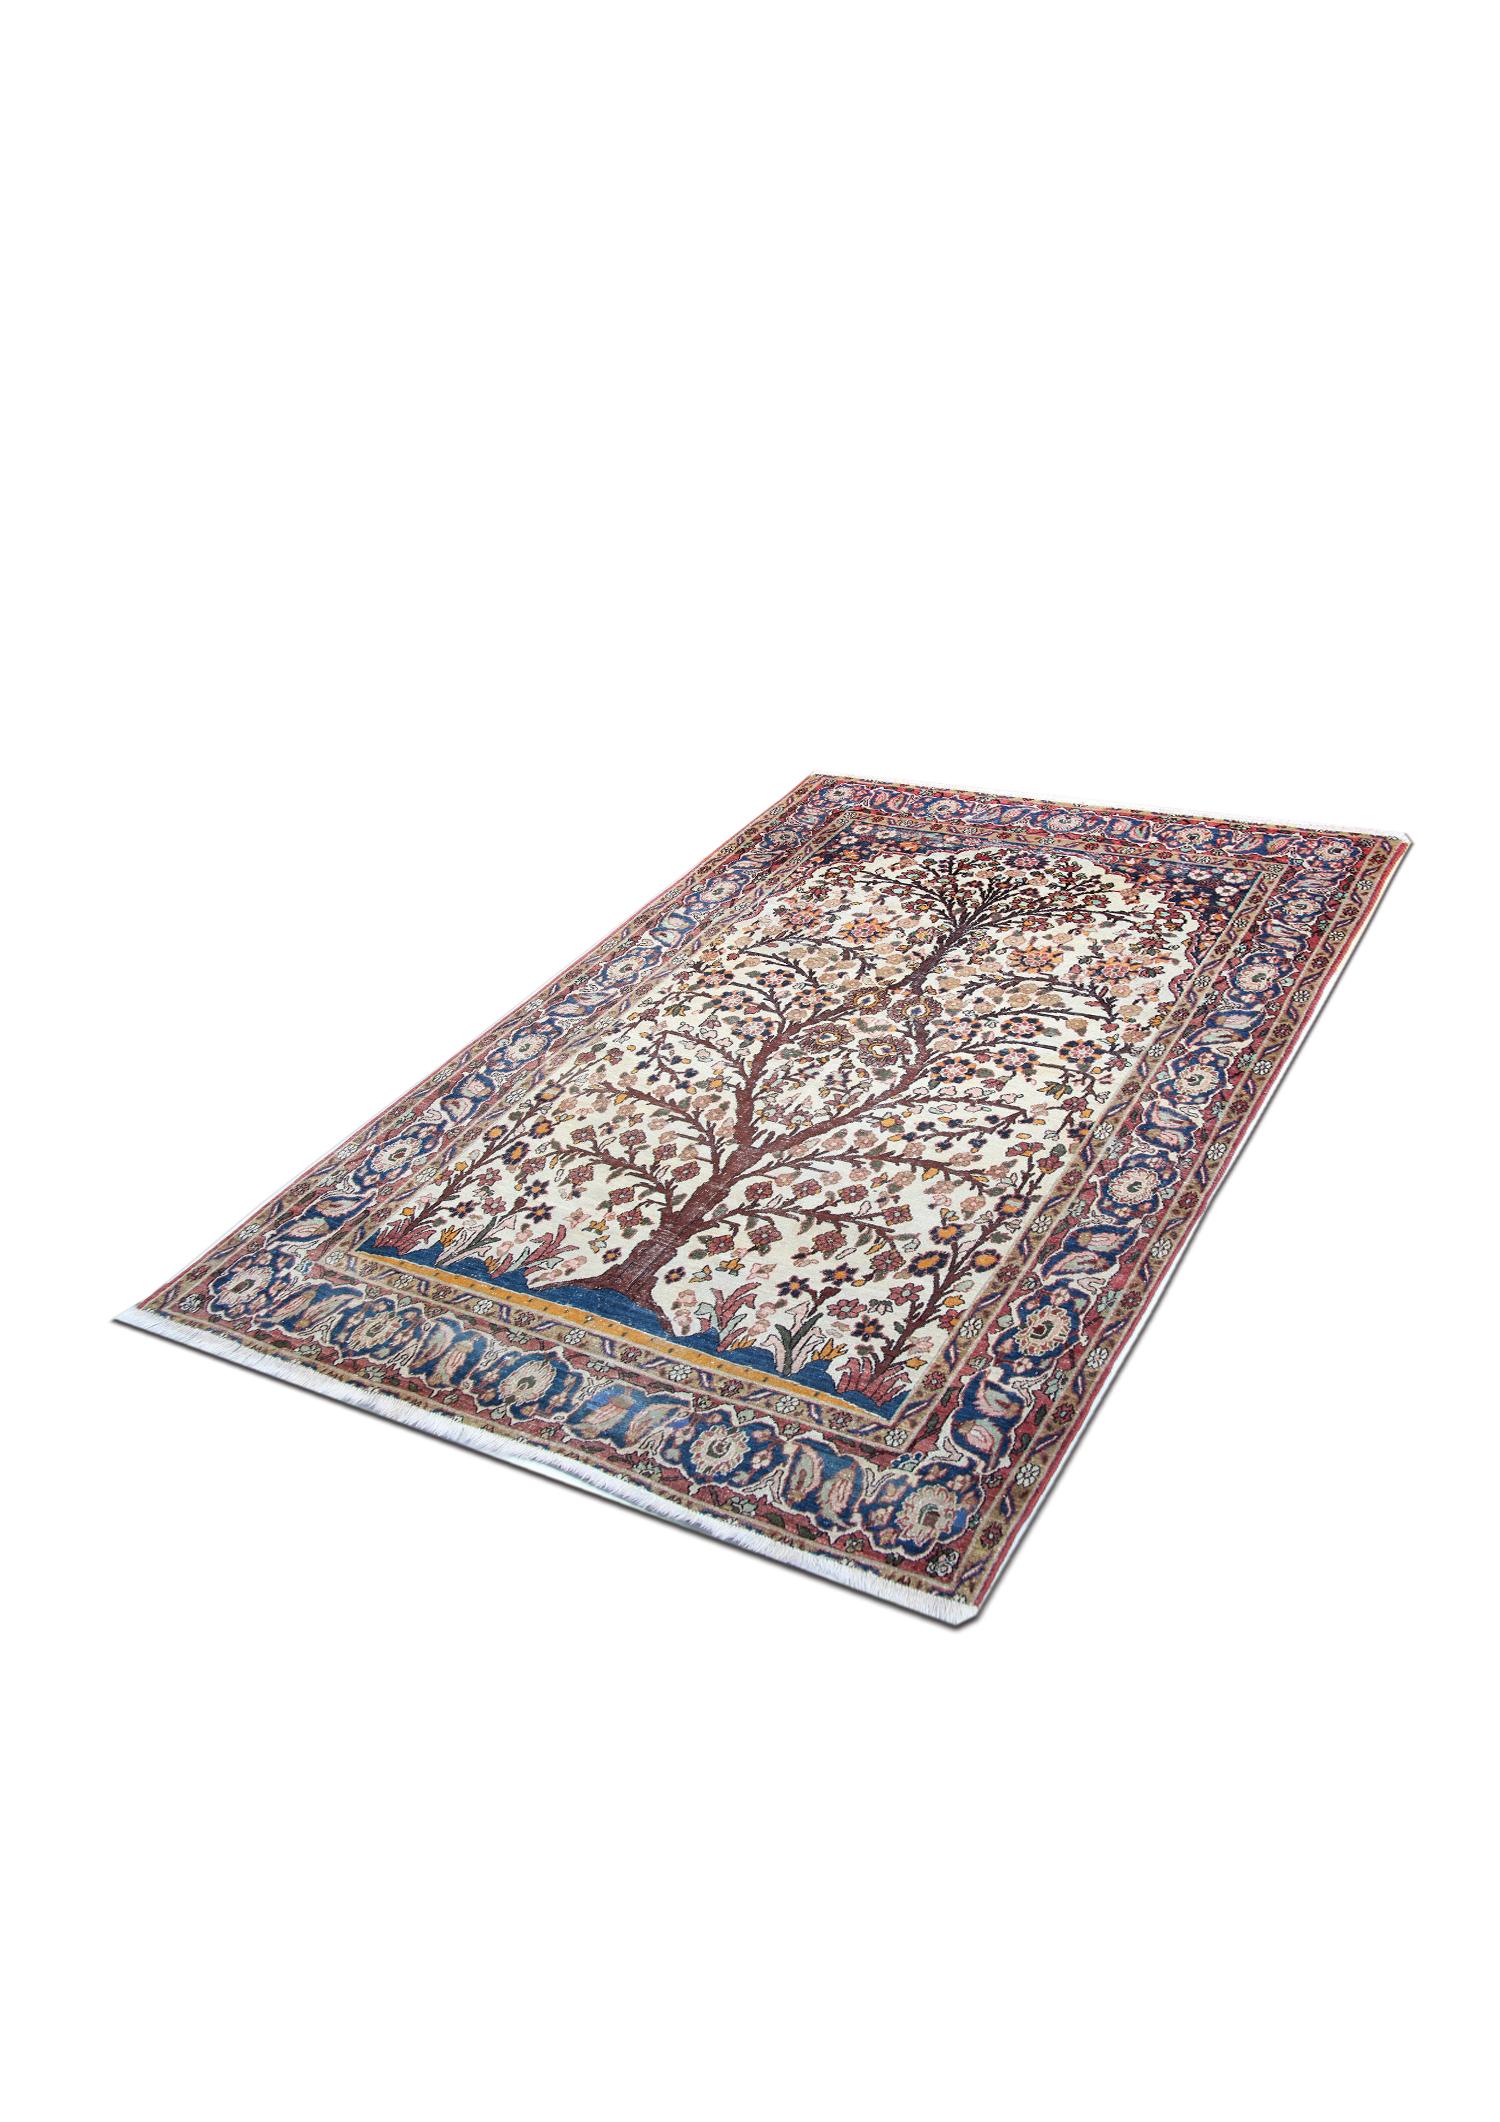 Empire Antique Rug Ivory Tree Of Life Organic Handwoven Oriental Area Rug For Sale